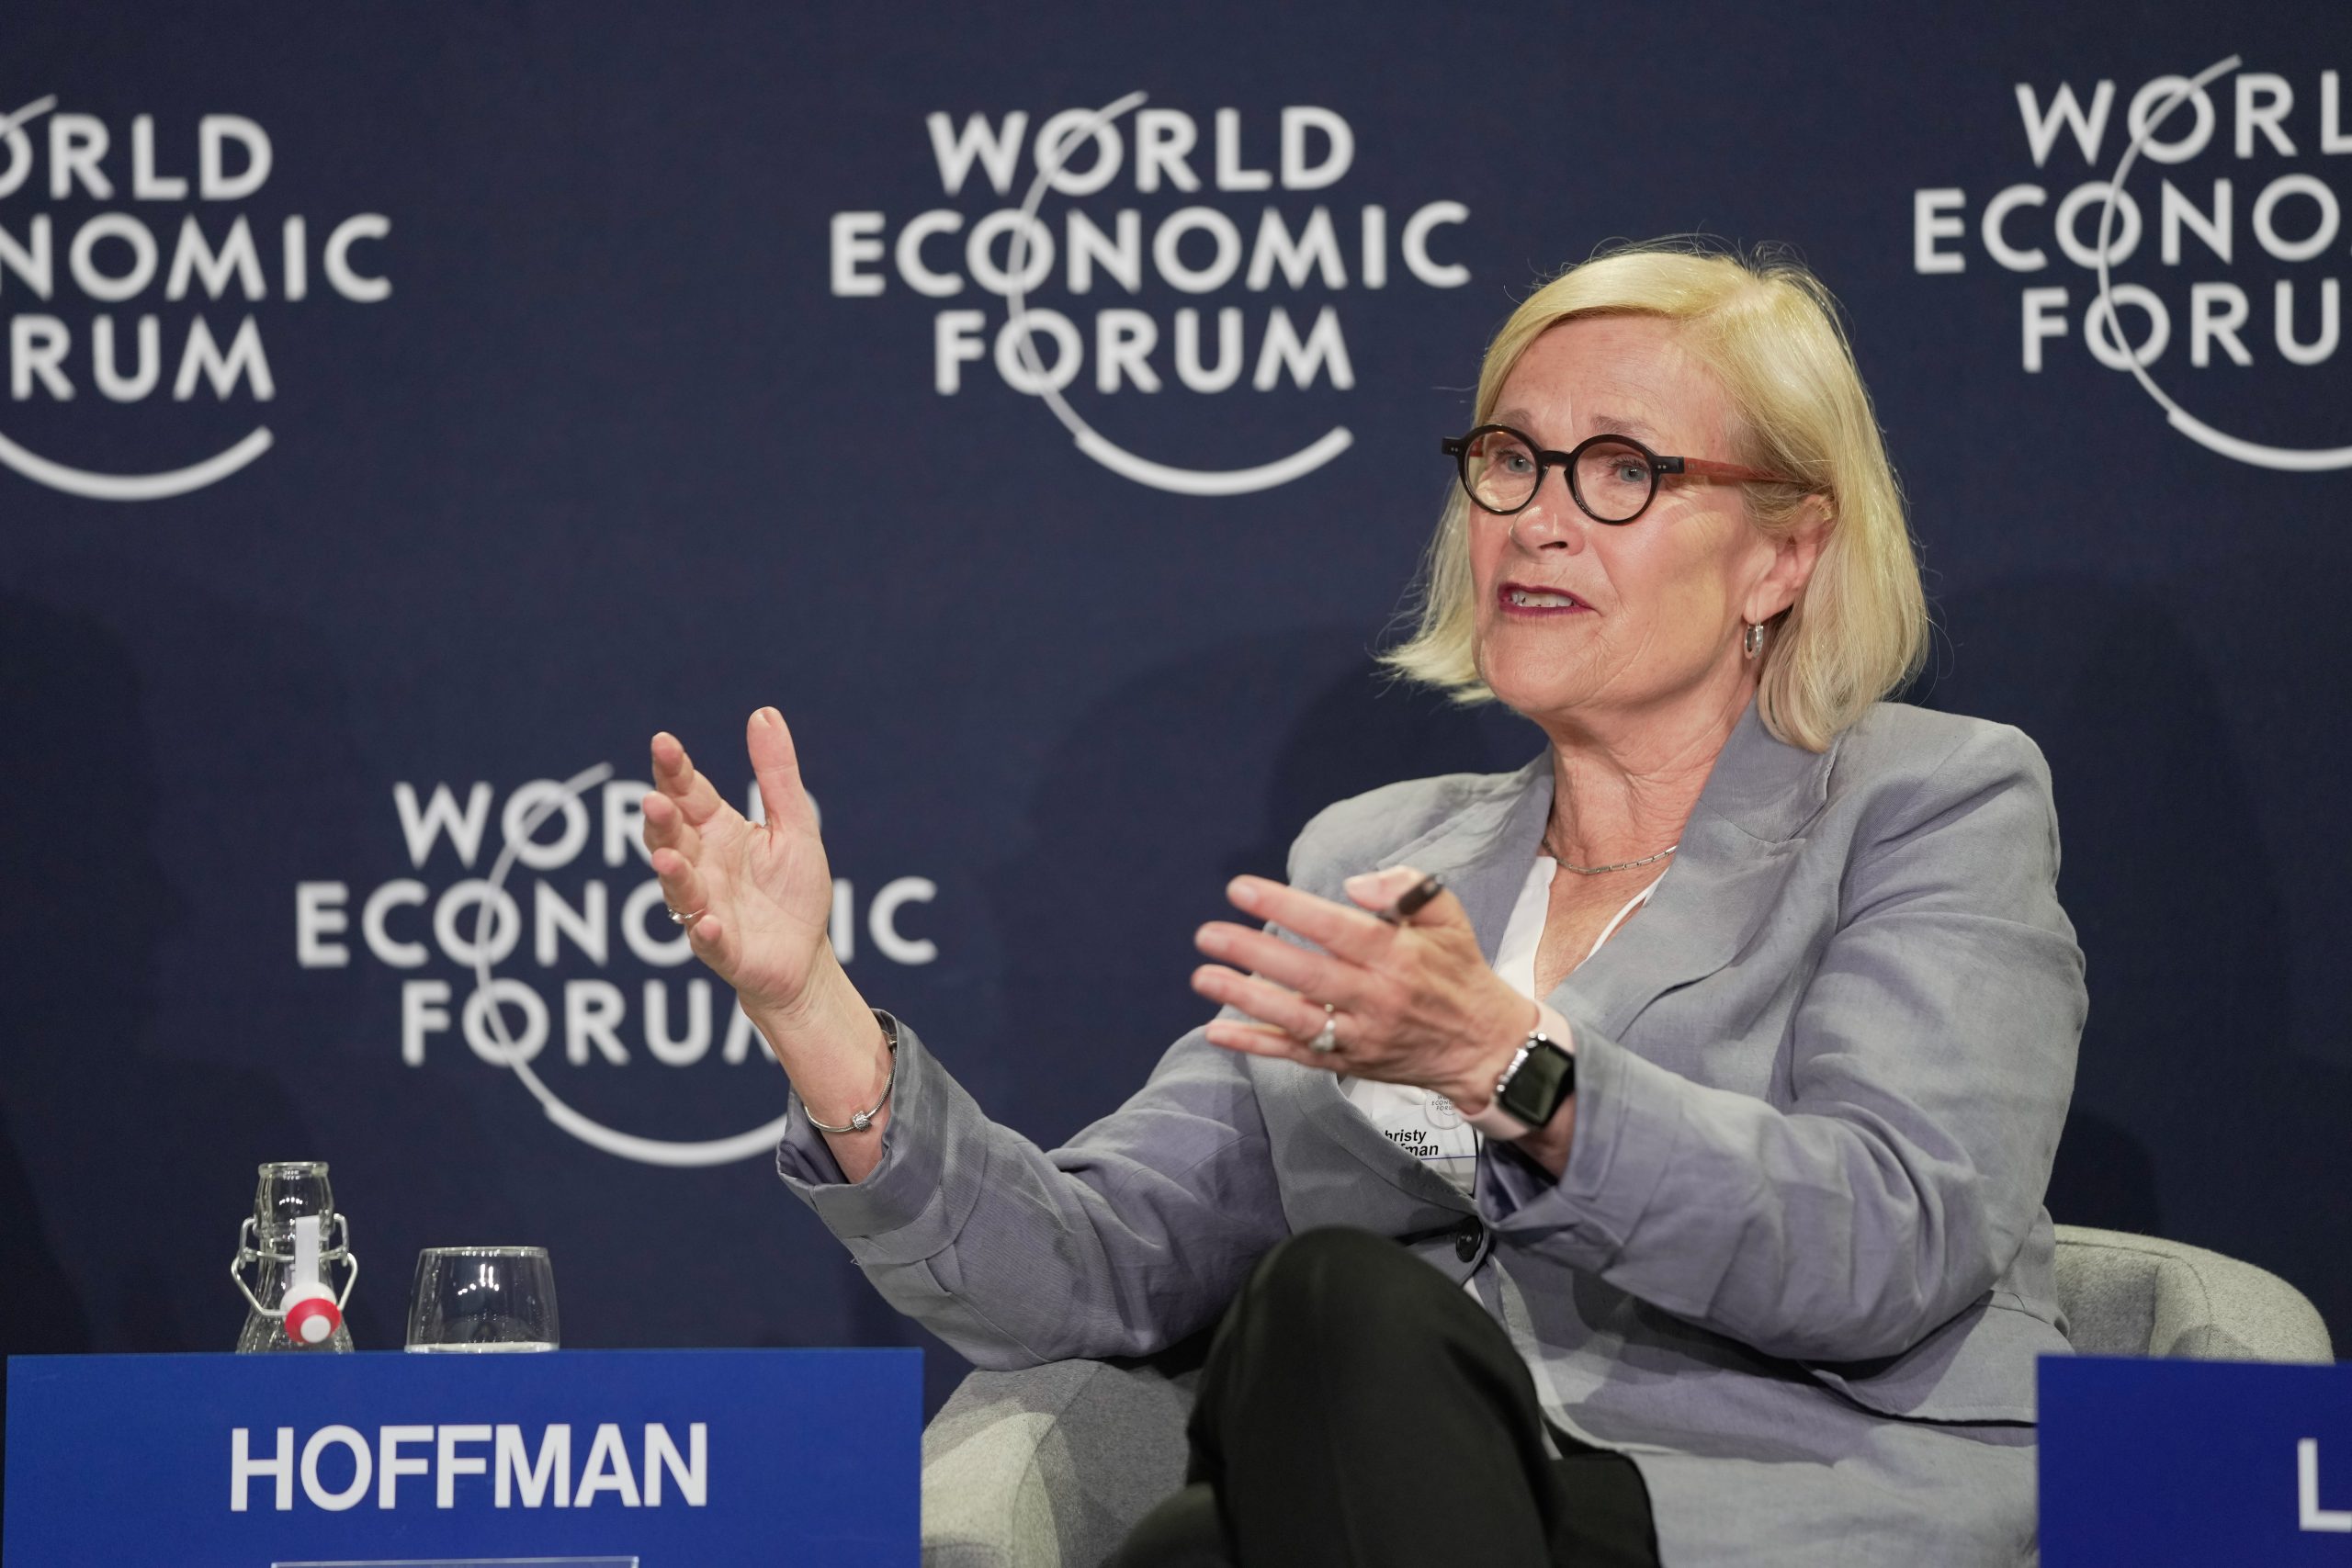 UNI GS to World Economic Forum in Davos: Employers must negotiate over AI risks, benefits